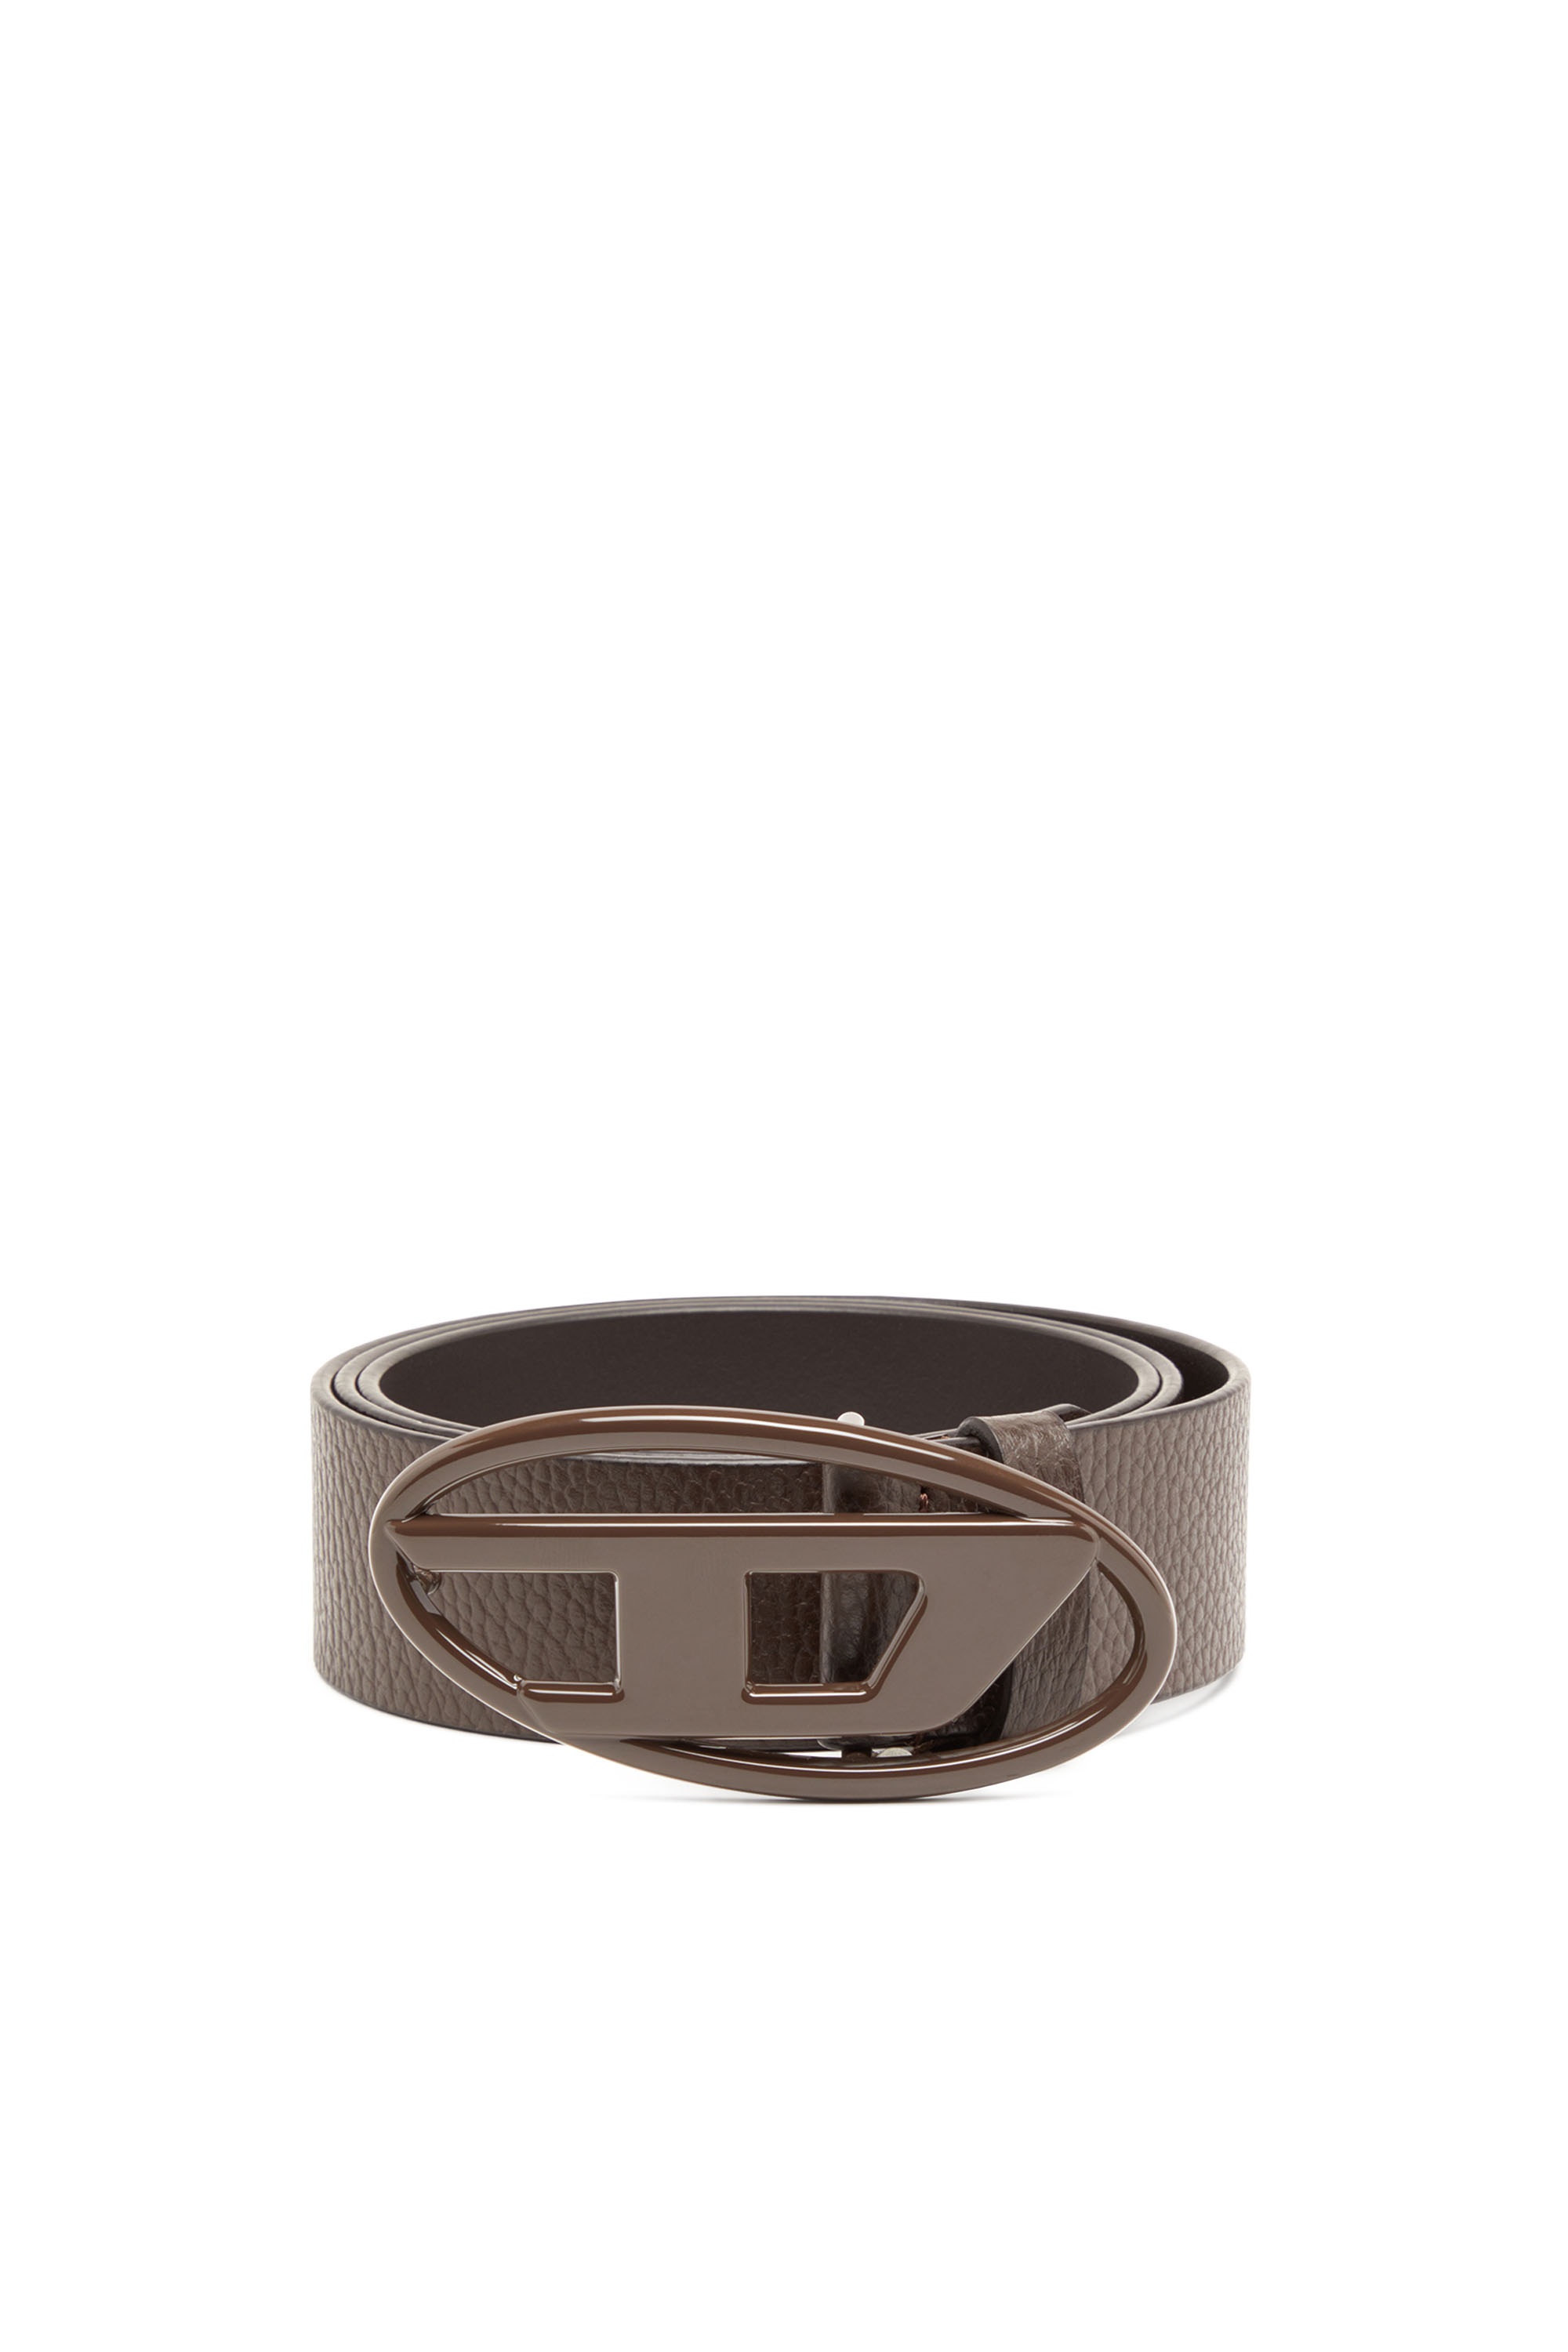 Shop Diesel Leather Belt With Matte Buckle In Brown